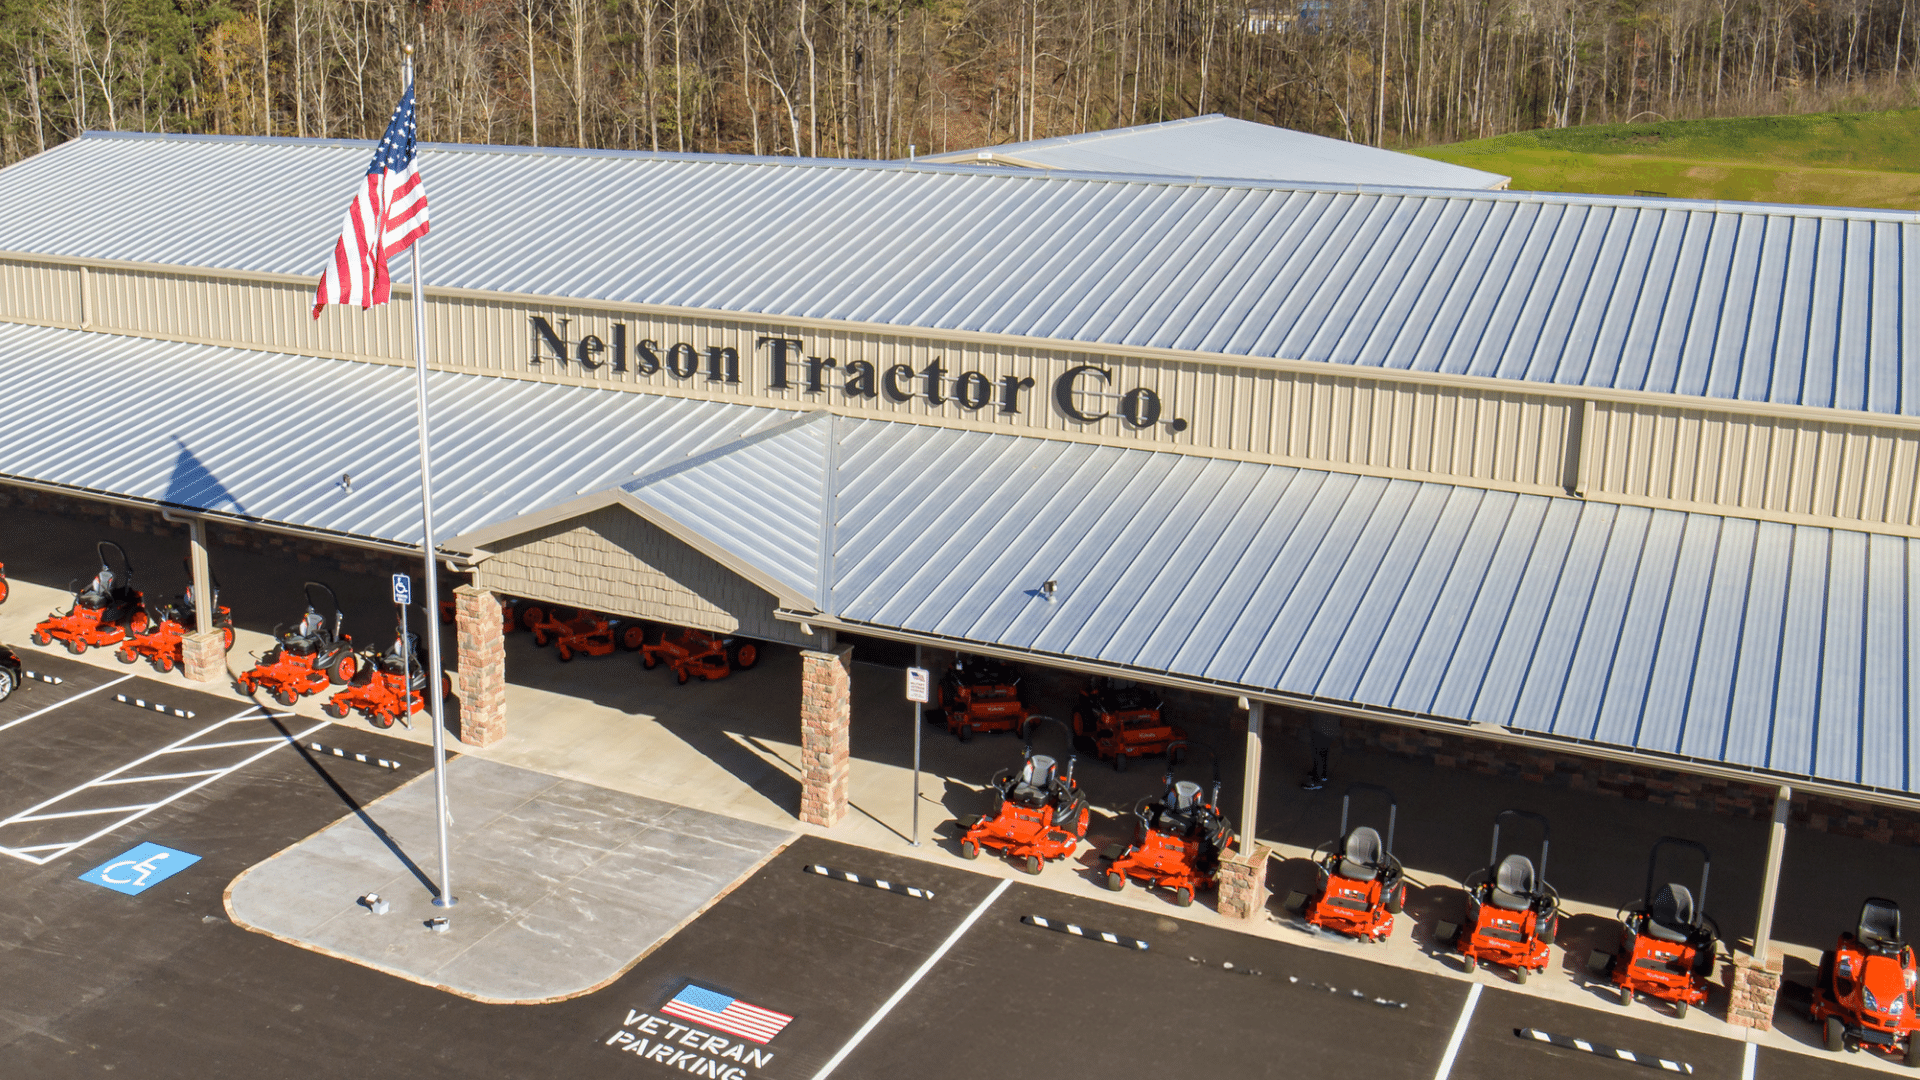 Nelson Tractor Company Dealership